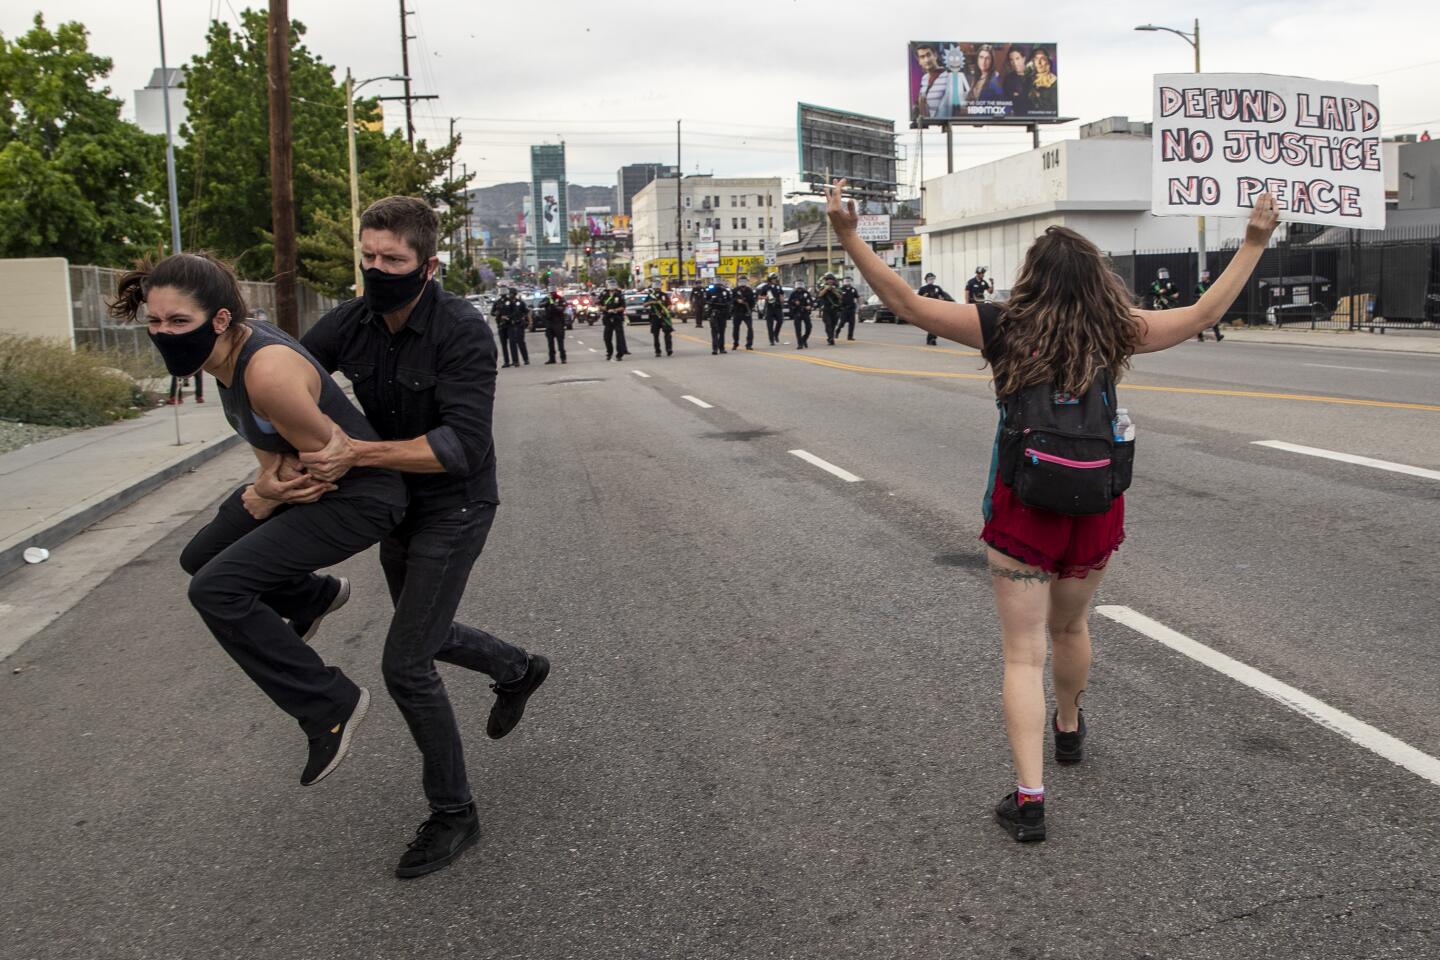 Police advance on a line of protesters in Hollywood, firing rubber bullets.